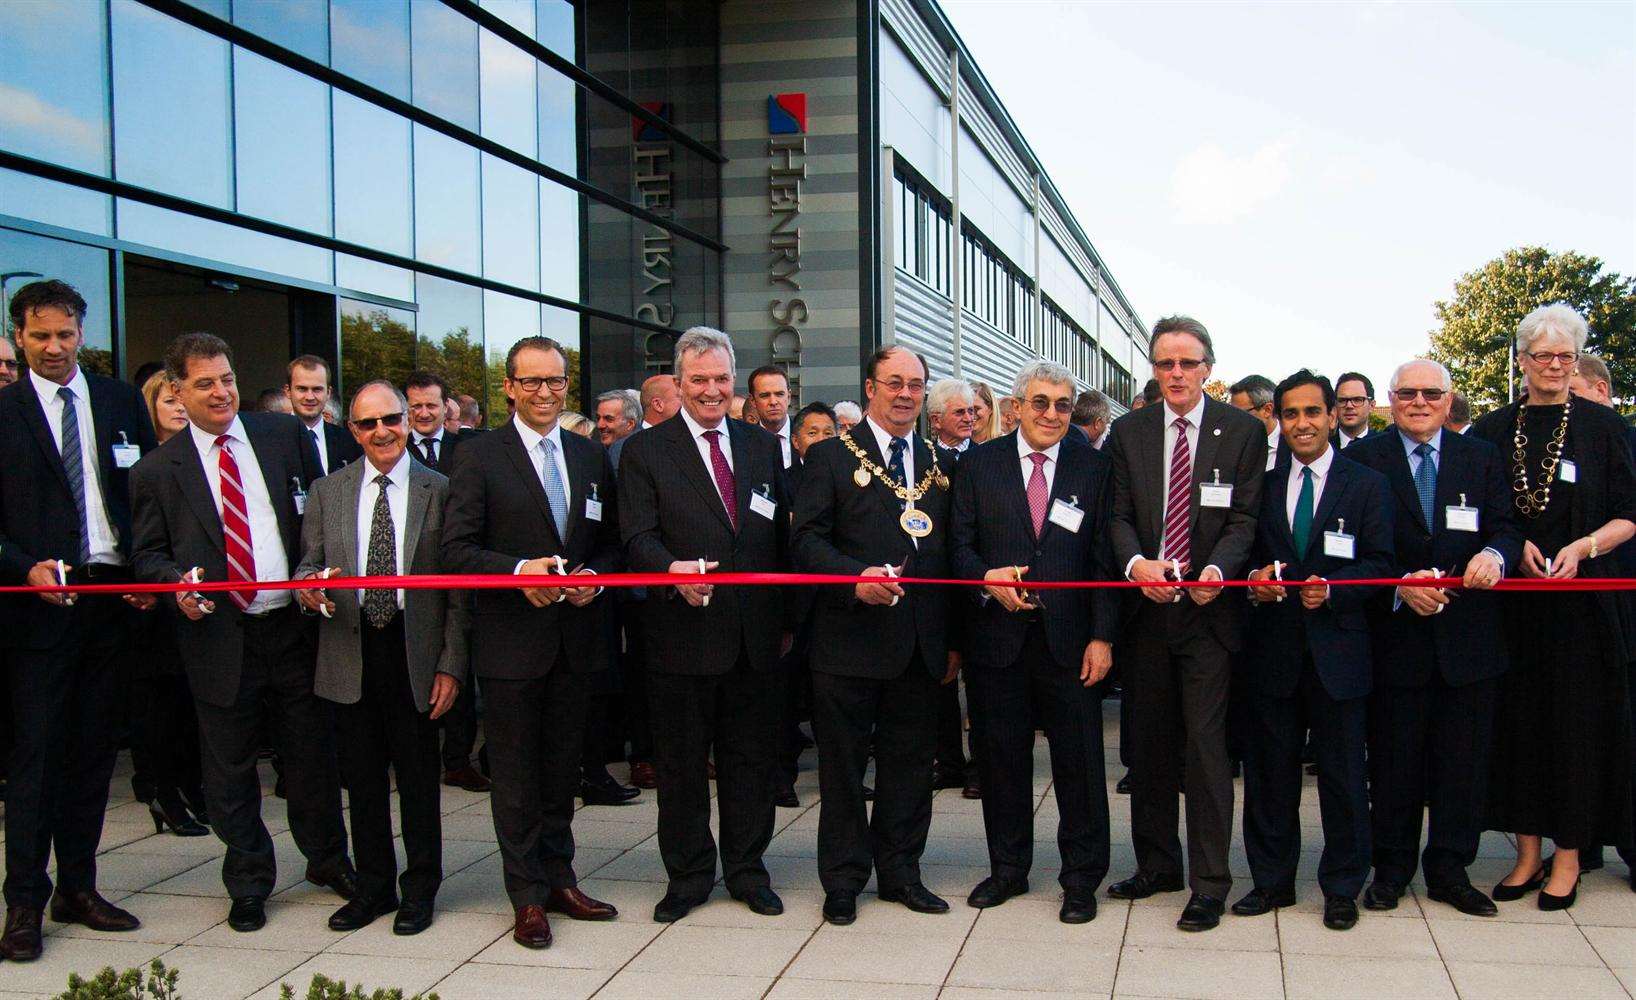 Medway's mayor Cllr Barry Kemp and Gillingham and Rainham MP Rehman Chishti join Henry Schein's chief executive Stanley Bergman to cut the ribbon on the new 85,000 sq ft building at Gillingham Business Park